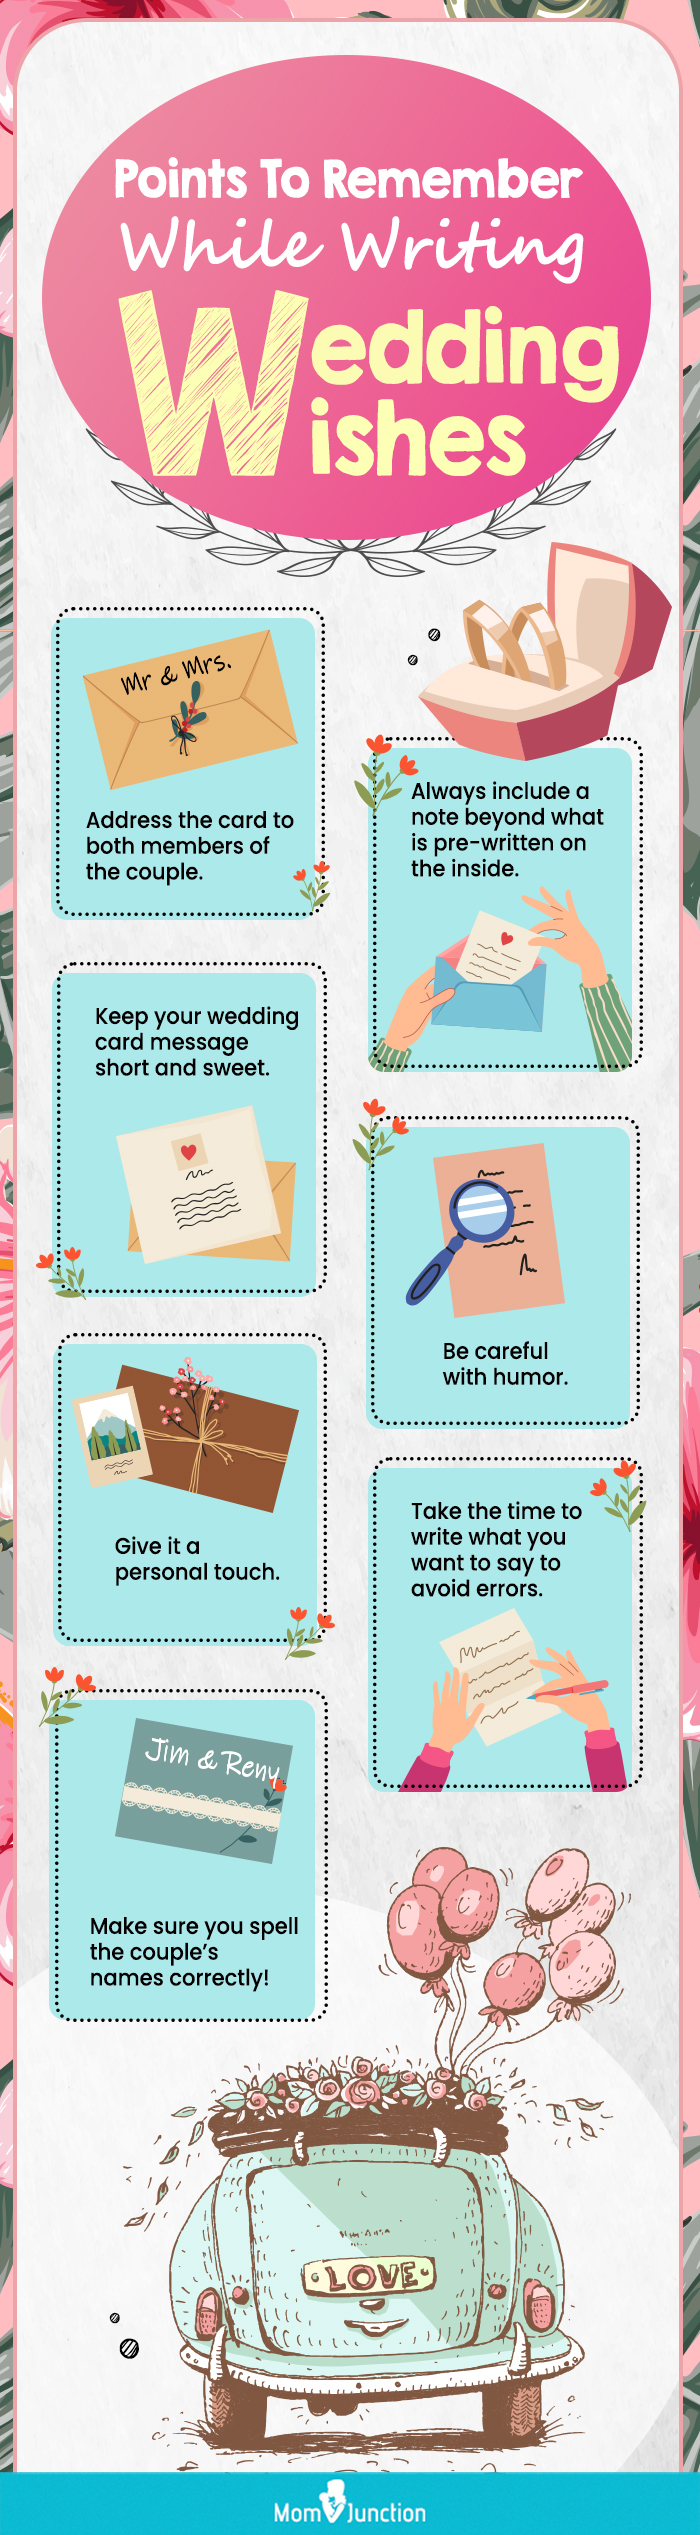 points to remember while writing wedding wishes [infographic]